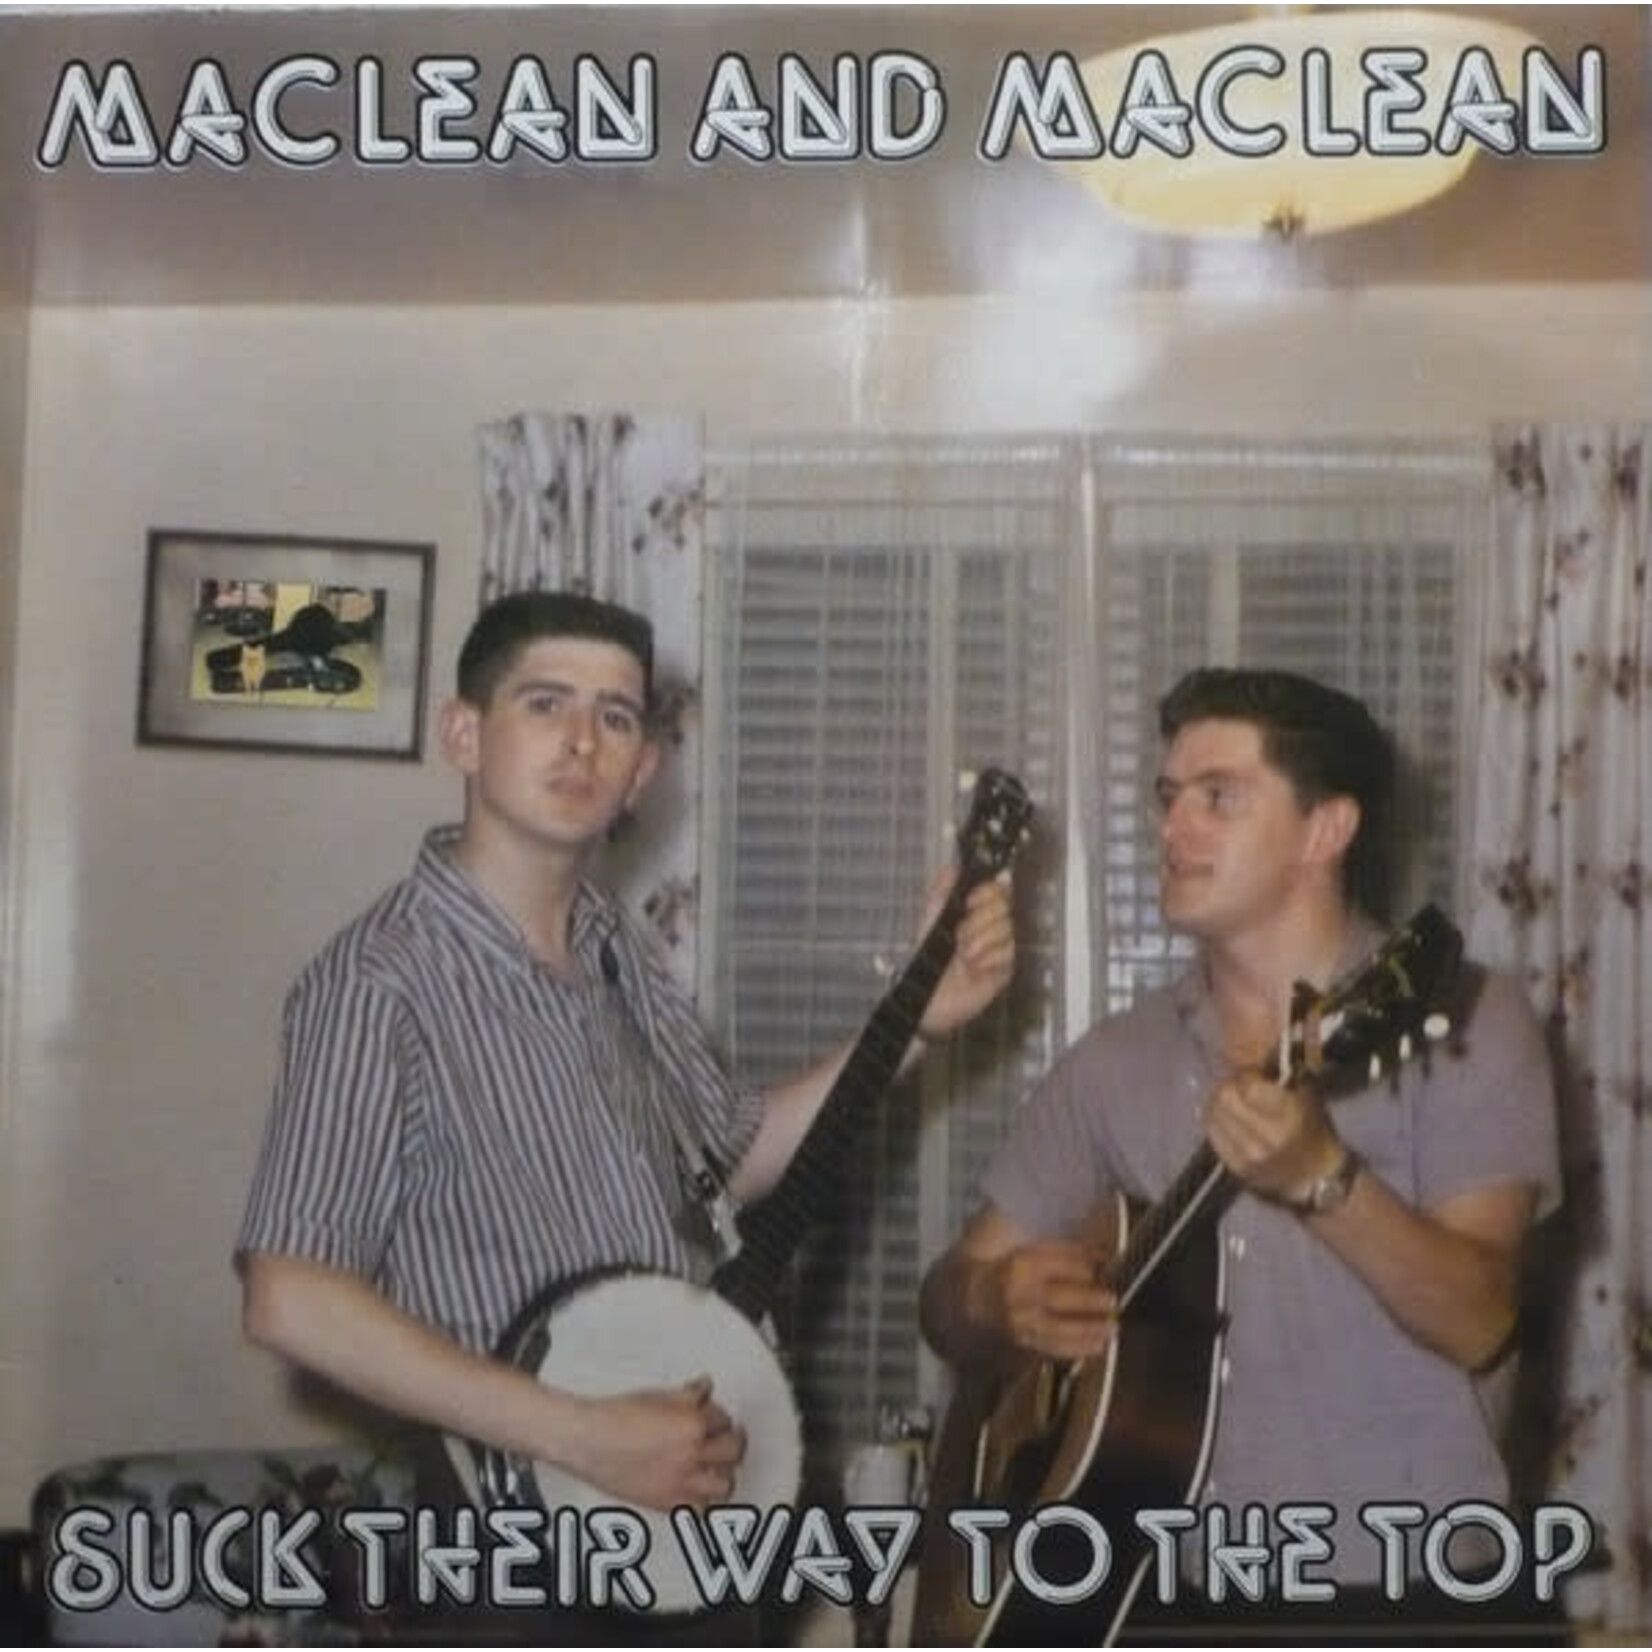 Maclean And Maclean Maclean And Maclean – Suck Their Way To The Top / Take The 'O' Out Of Country (VG, 1980, LP, El Mocambo – ELMO 754)